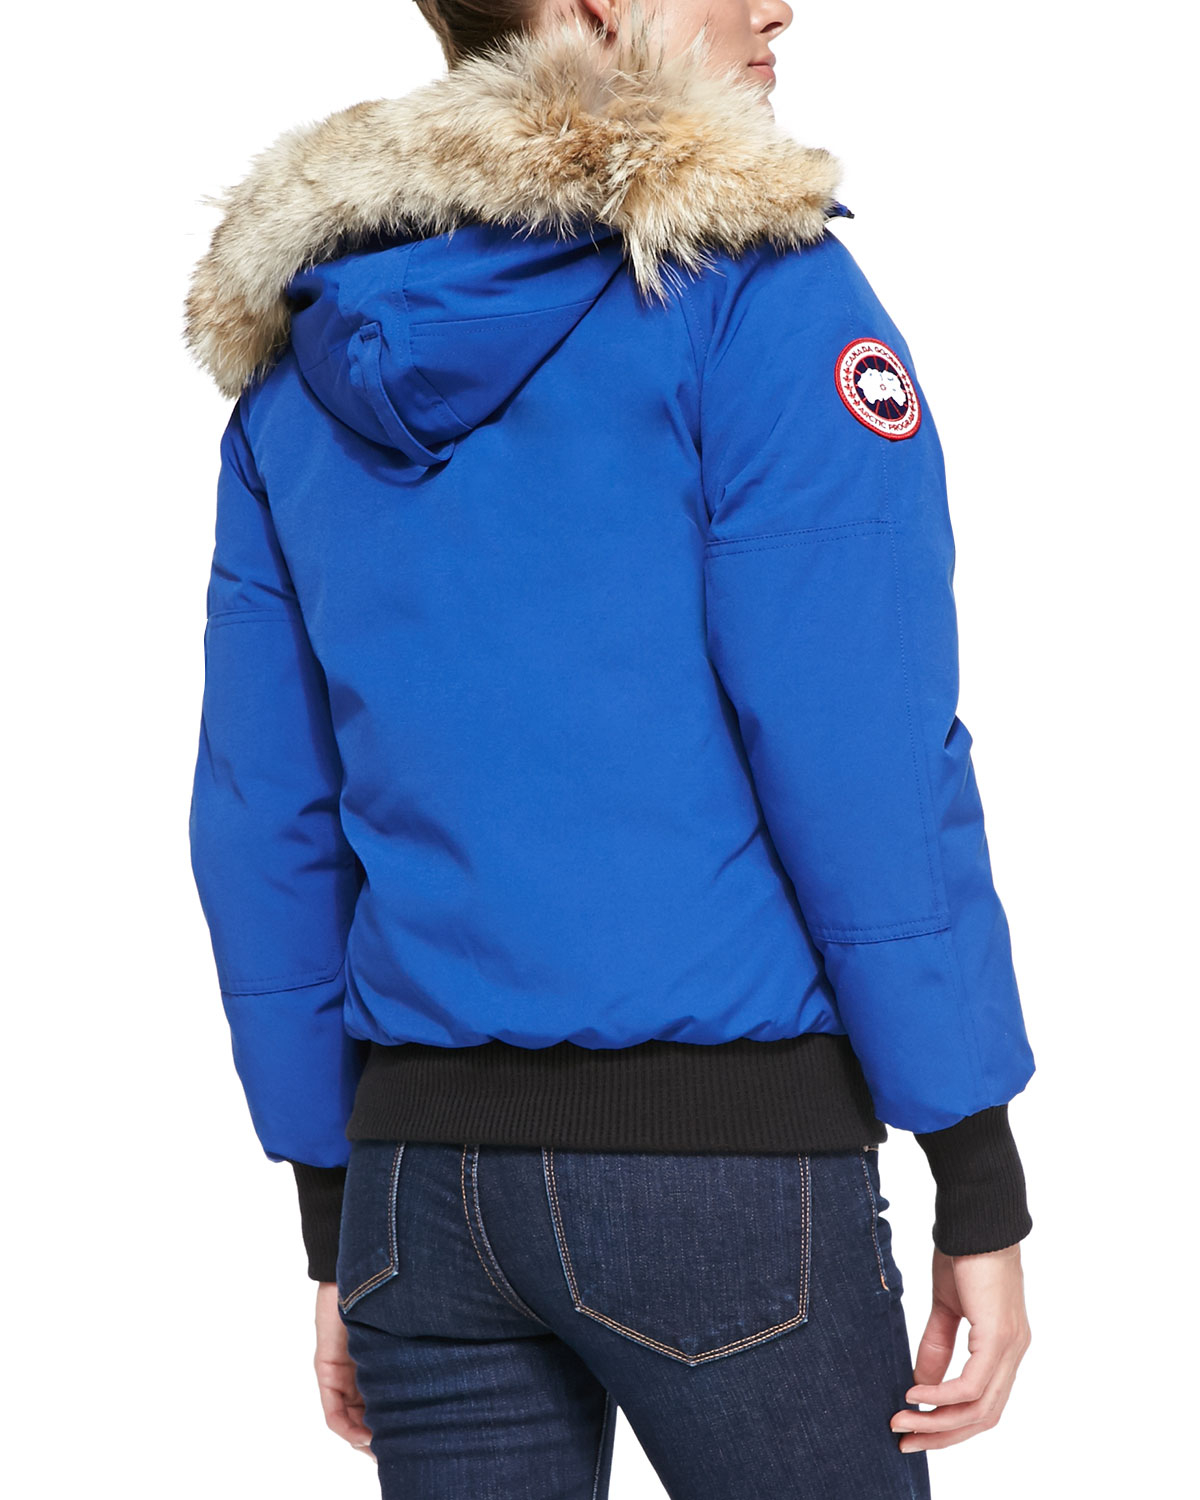 Canada Goose montebello parka outlet price - Canada goose Chilliwack Bomber Coat With Fur Hood in Blue (white ...